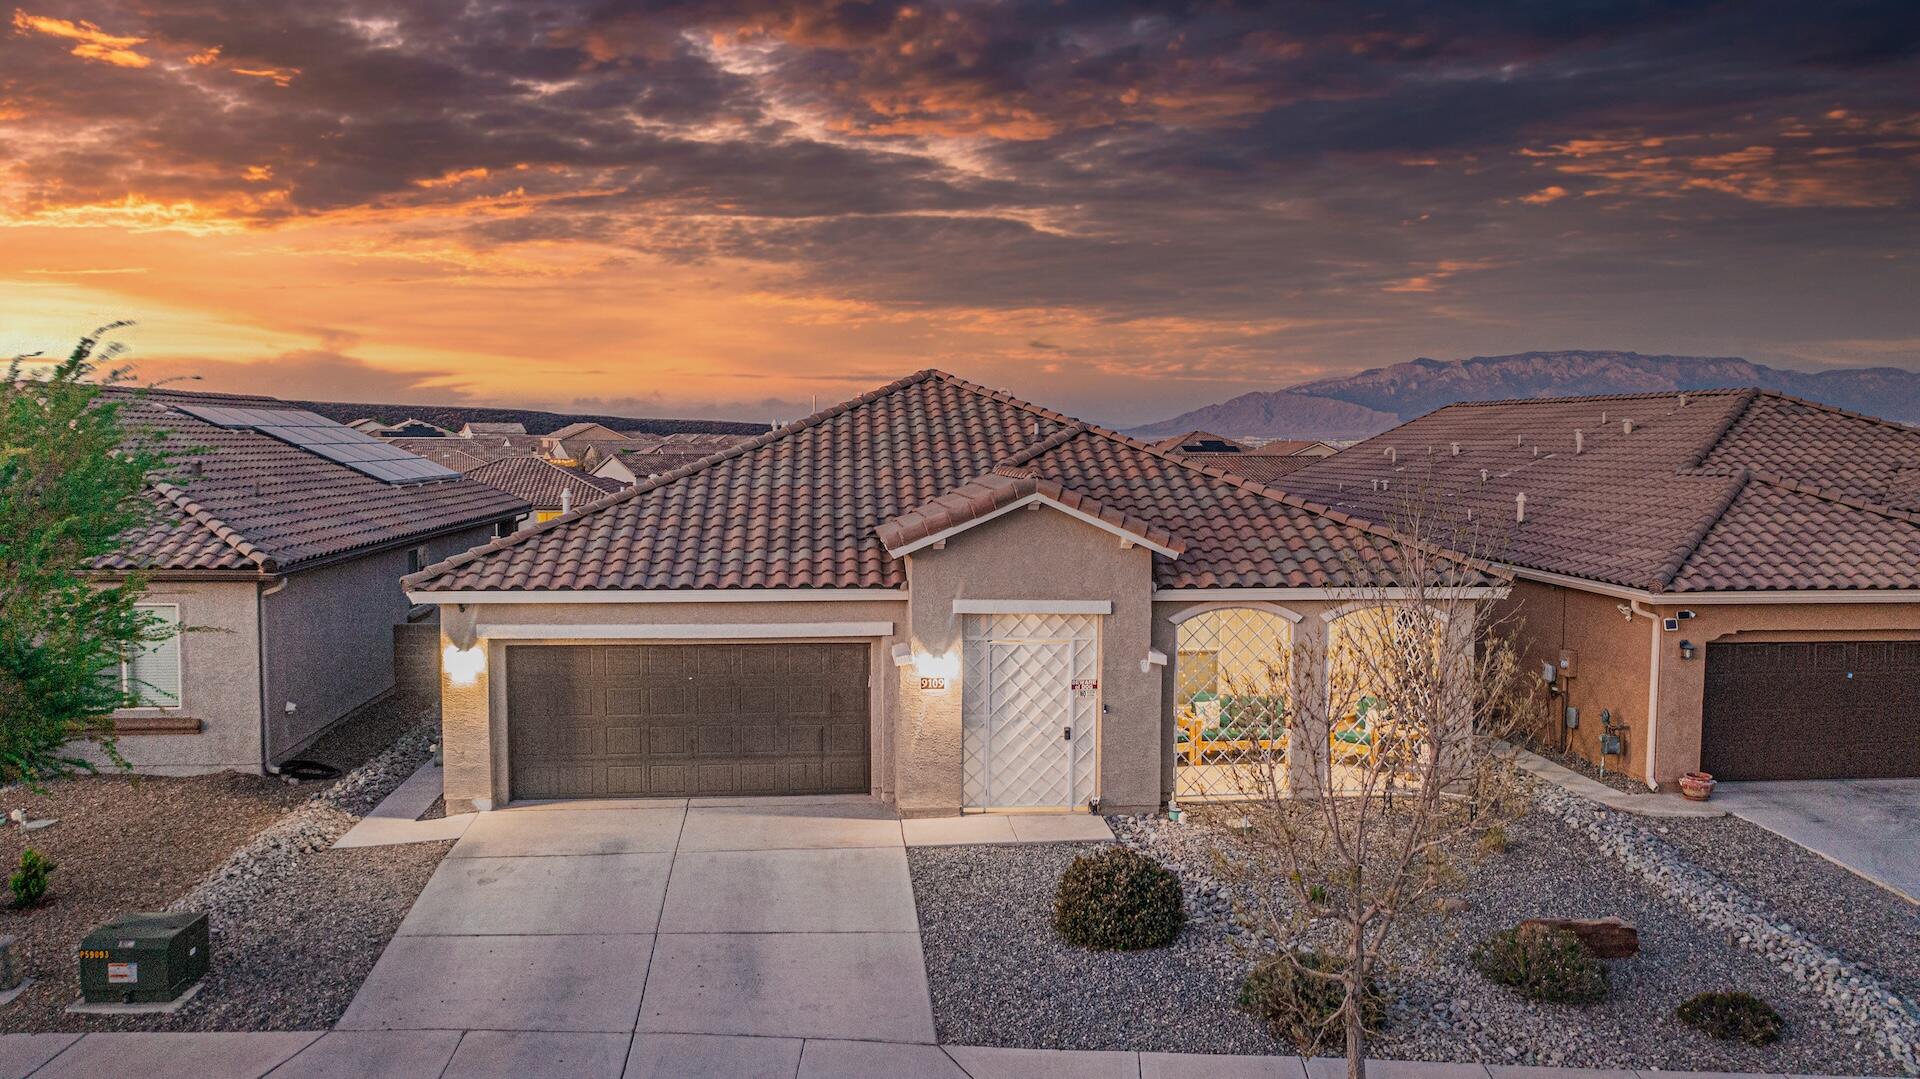 Discover luxury living in this spacious Pulte home in Mirehaven, offering breathtaking views of the Sandia Mountains and city lights. With 5 bedrooms, including an owner's suite and secondary suite, 3 full bathrooms, and an office, this home provides both elegance and functionality. Enjoy upgraded bay windows, an open kitchen with granite countertops and updated cabinetry, and outdoor entertaining spaces with covered porches. Additional features include a drip water system, dog run, security system, tile roof, and water softener/filter system.